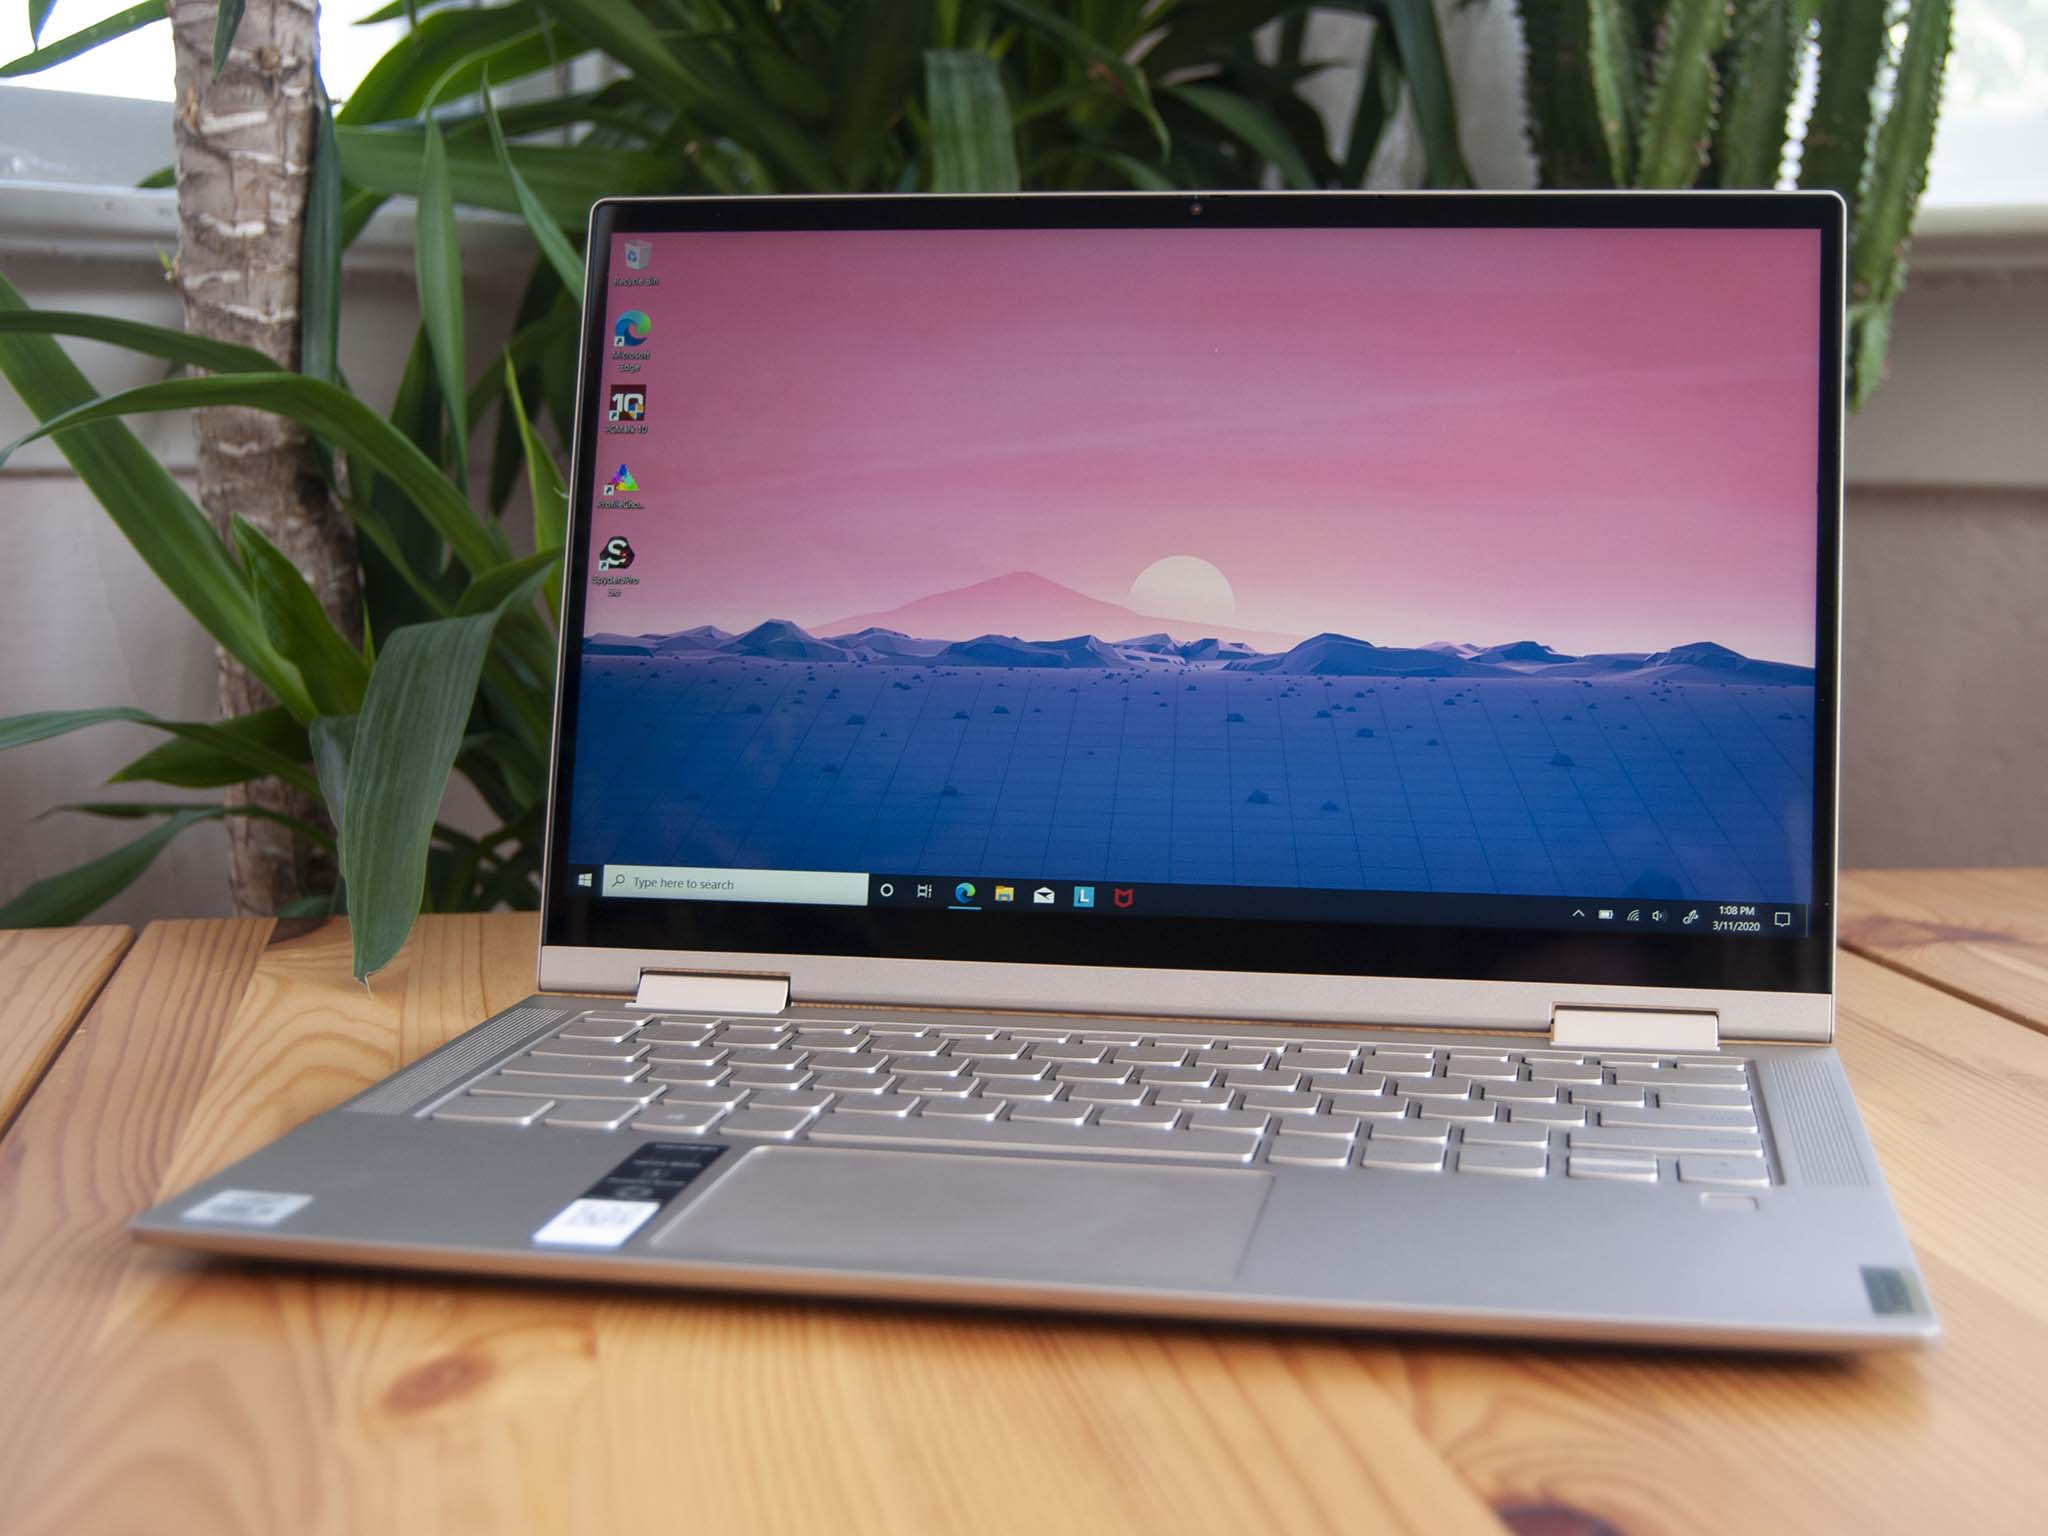 Lenovo Yoga C740 14 review: Fewer features than the Yoga C940, but far more affordable | Windows